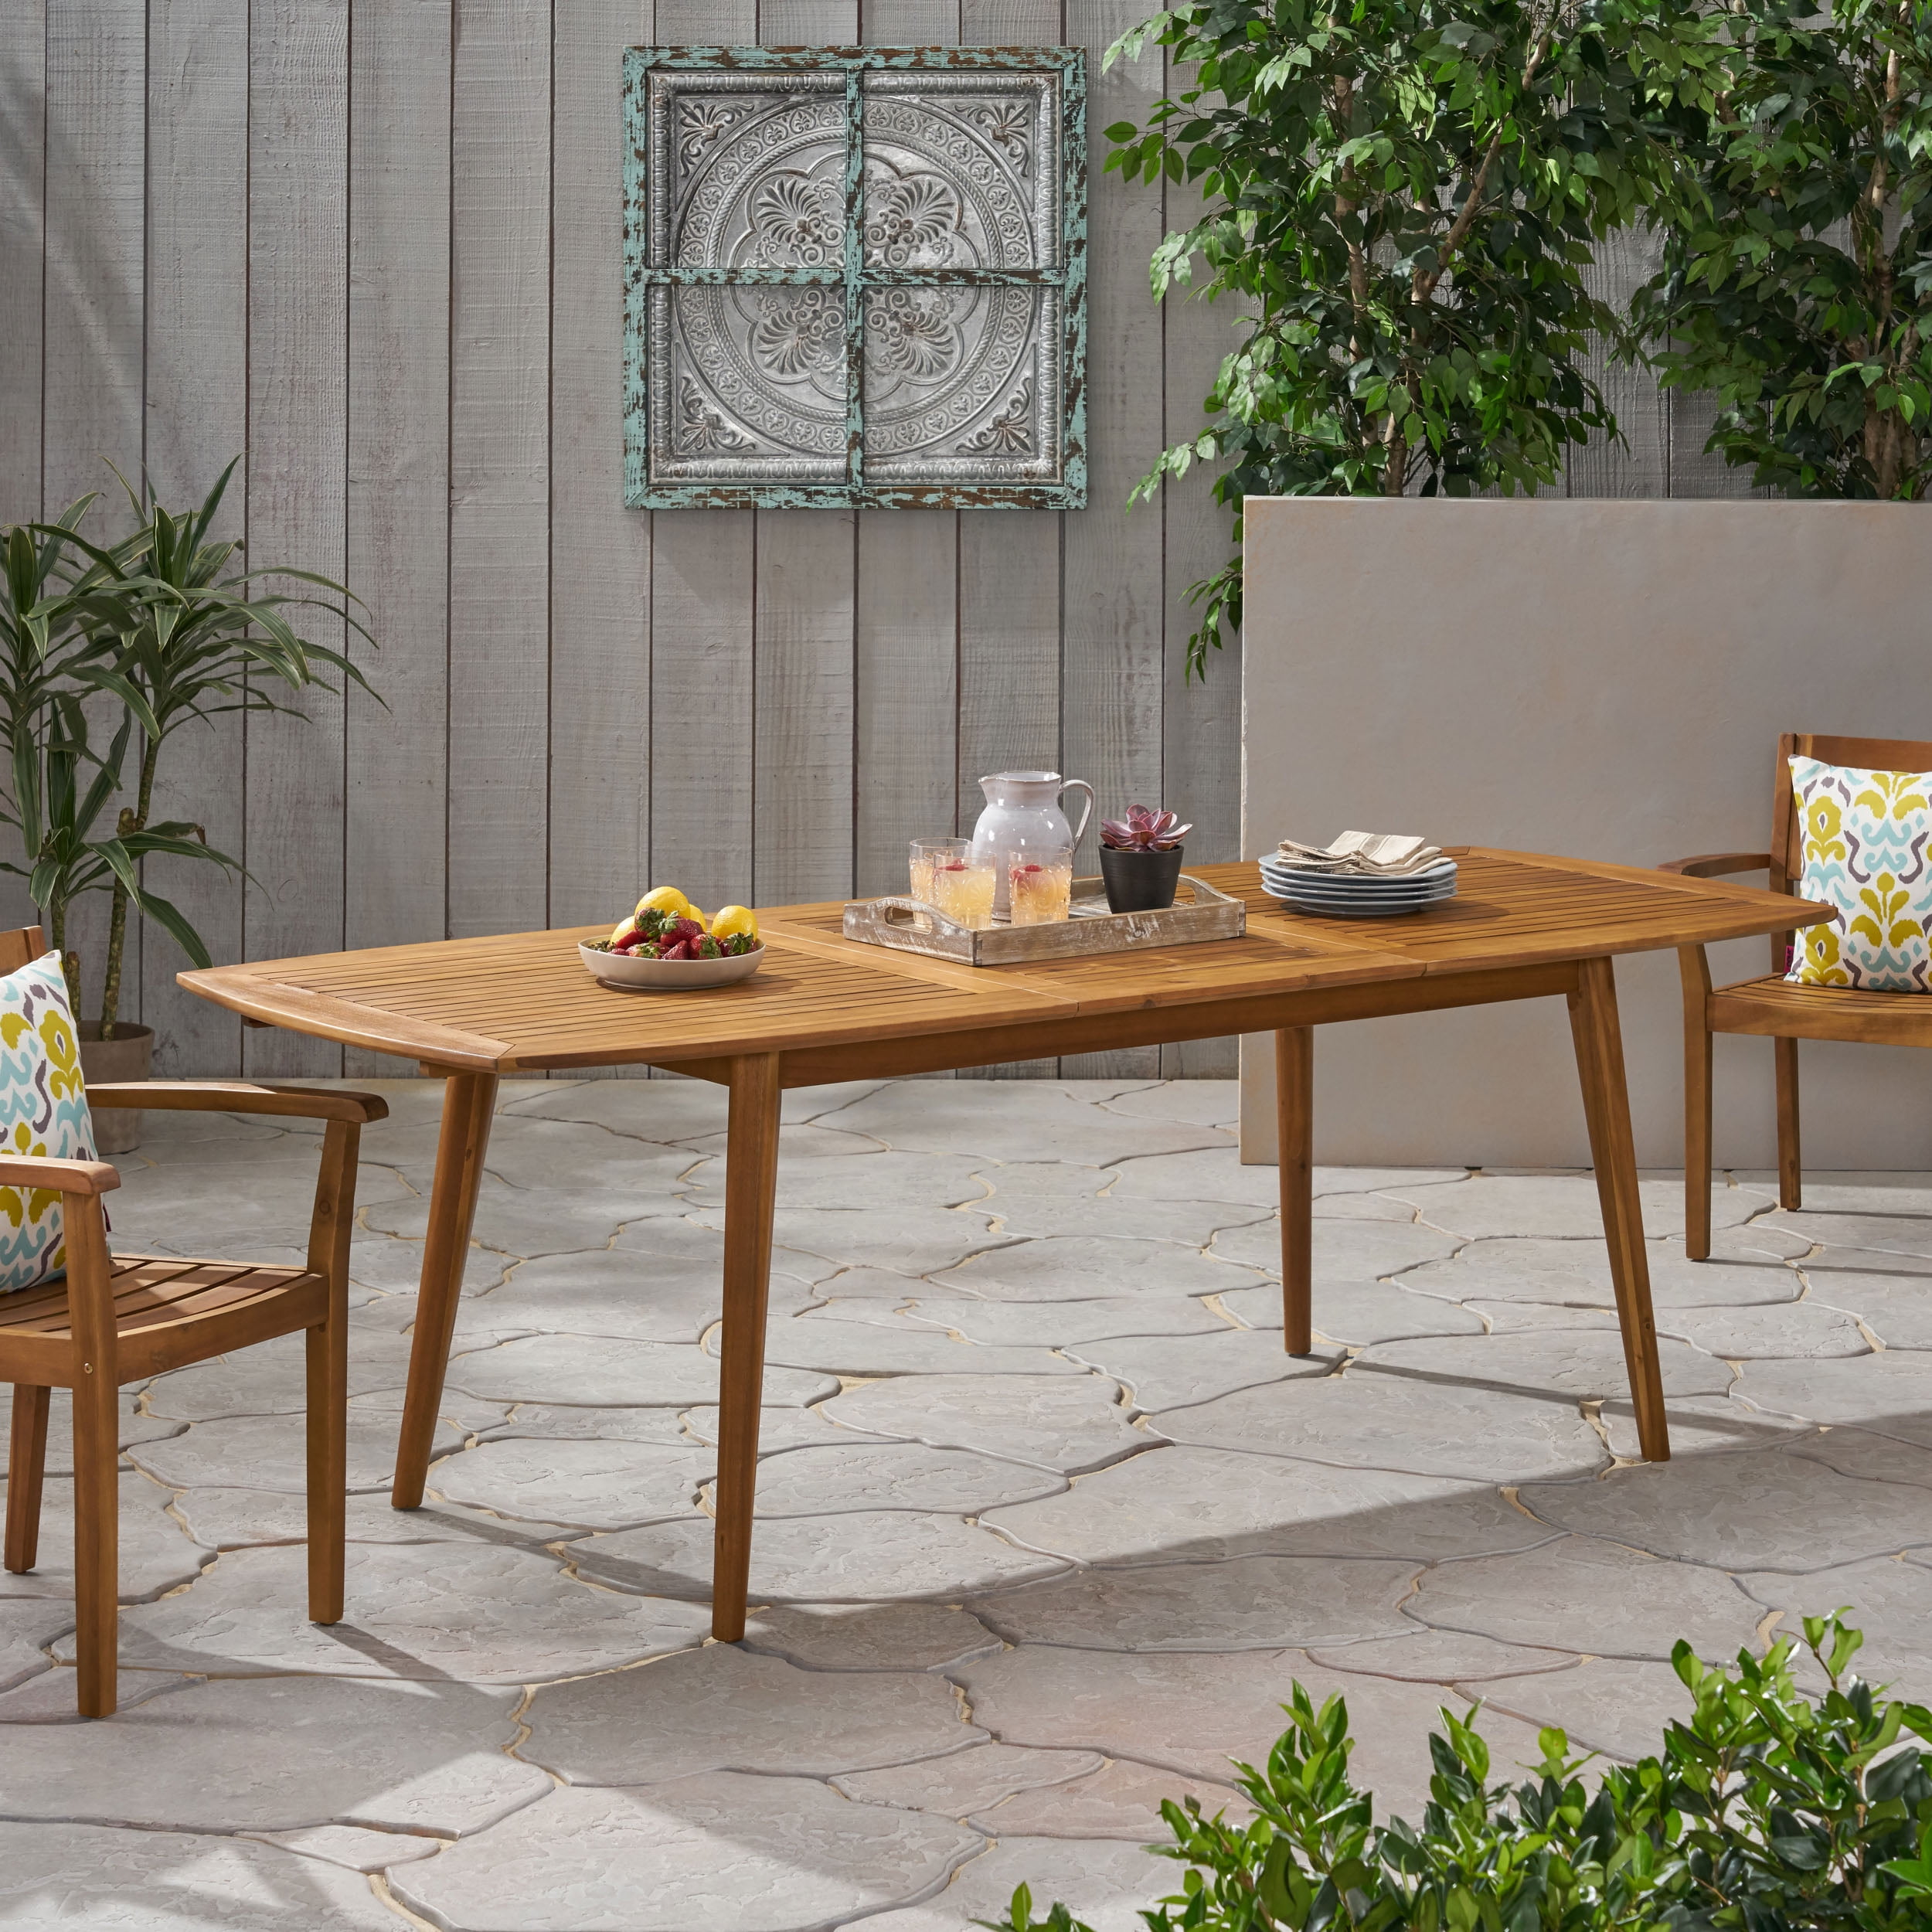 Find The Best Deals With Teak Dining Table On Sale